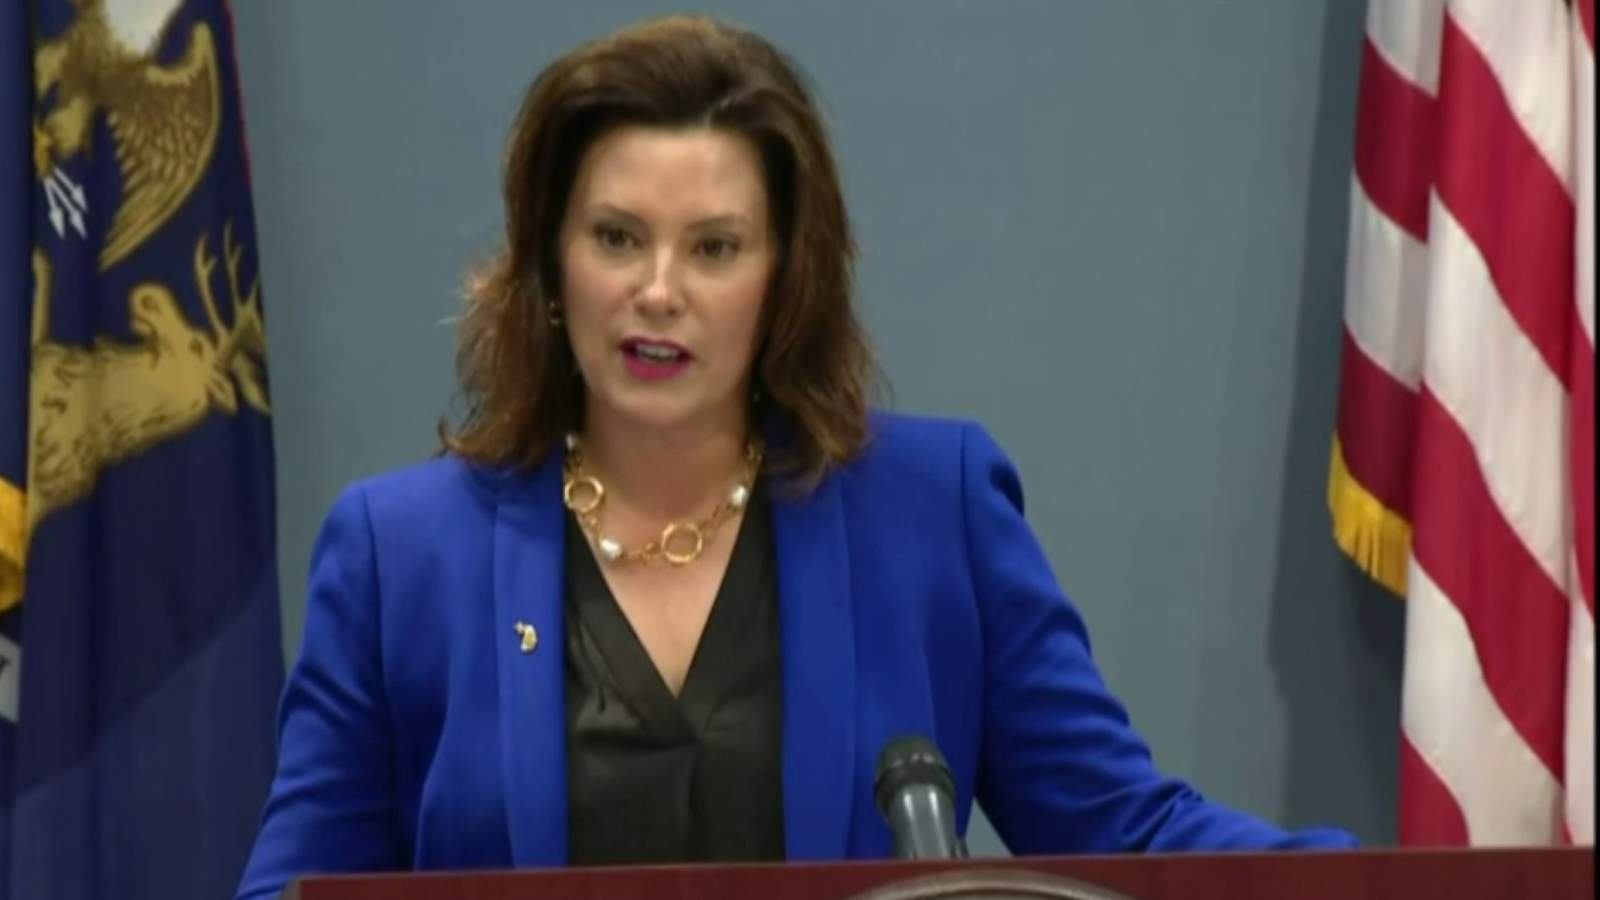 Exclusive poll results: Was plot to kidnap Michigan Gov. Whitmer a serious threat?